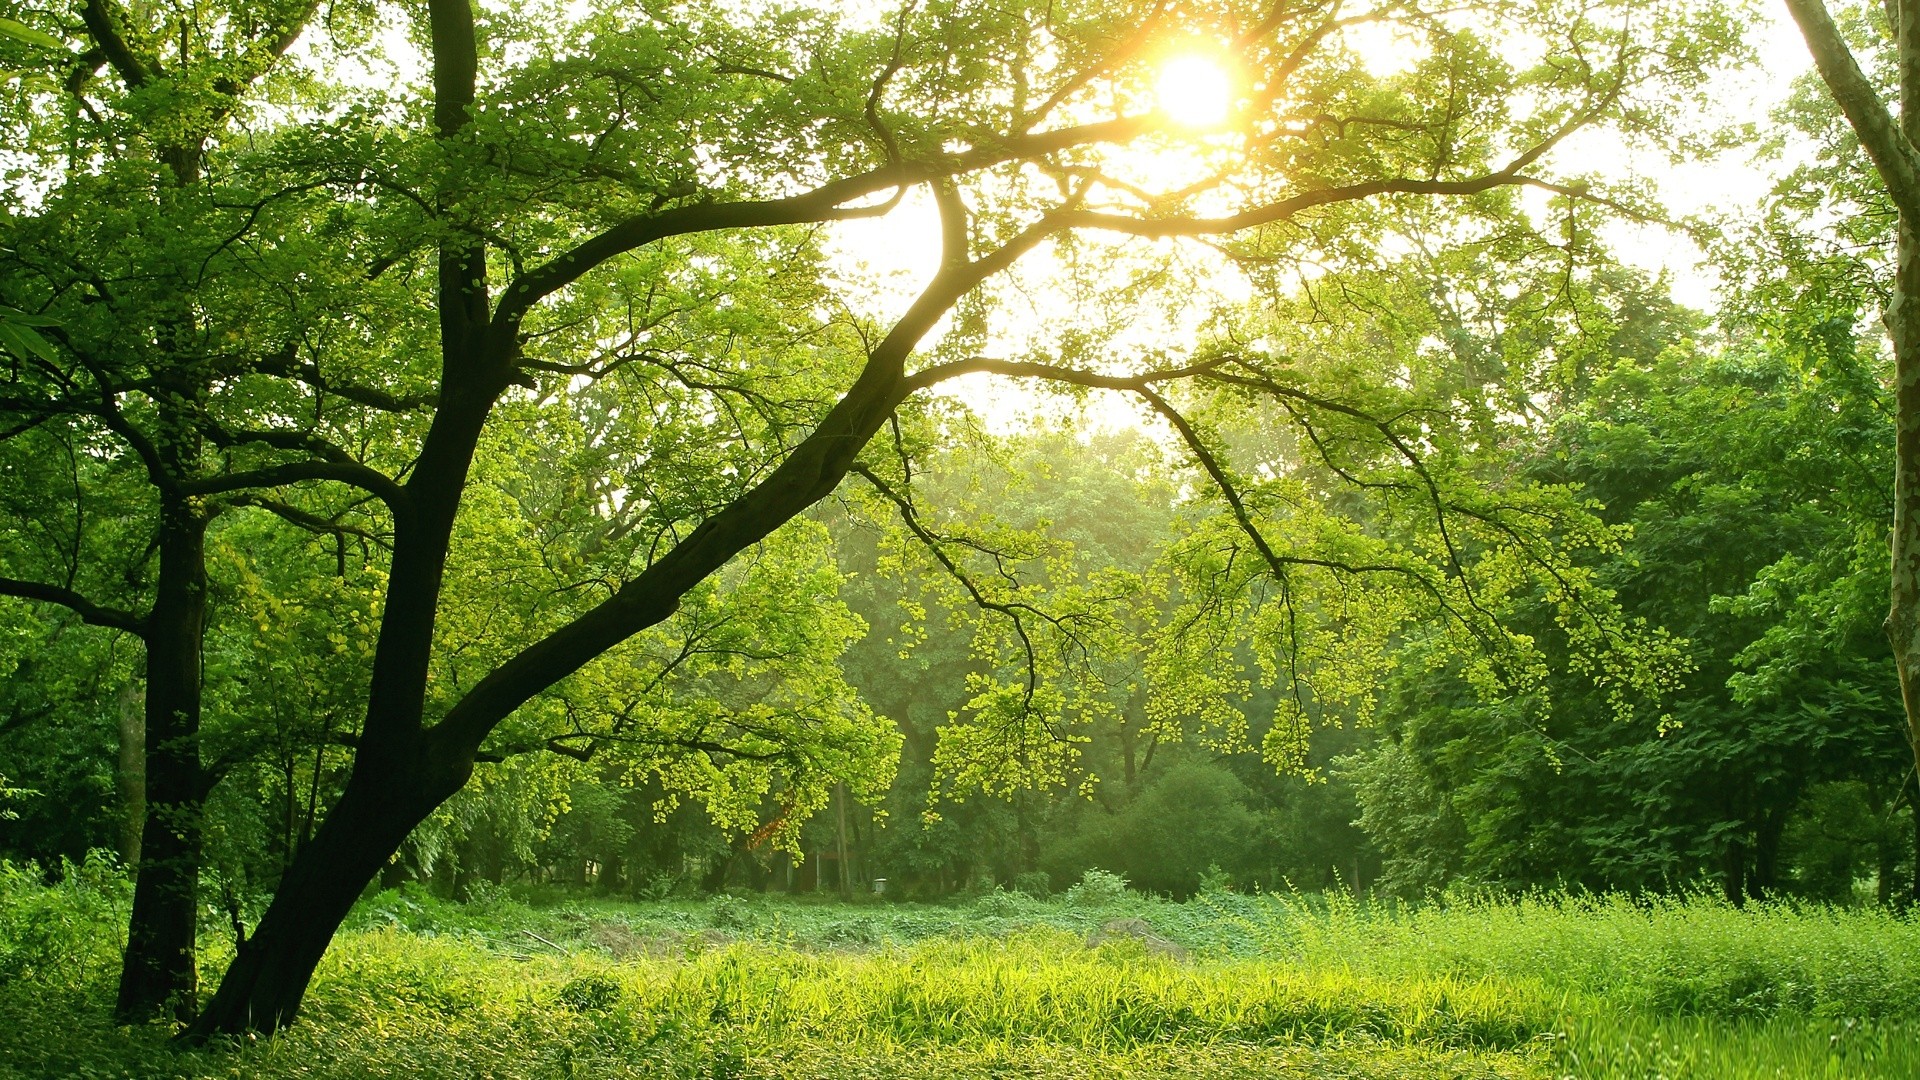 General 1920x1080 trees sunlight nature green forest forest clearing foliage branch grass summer